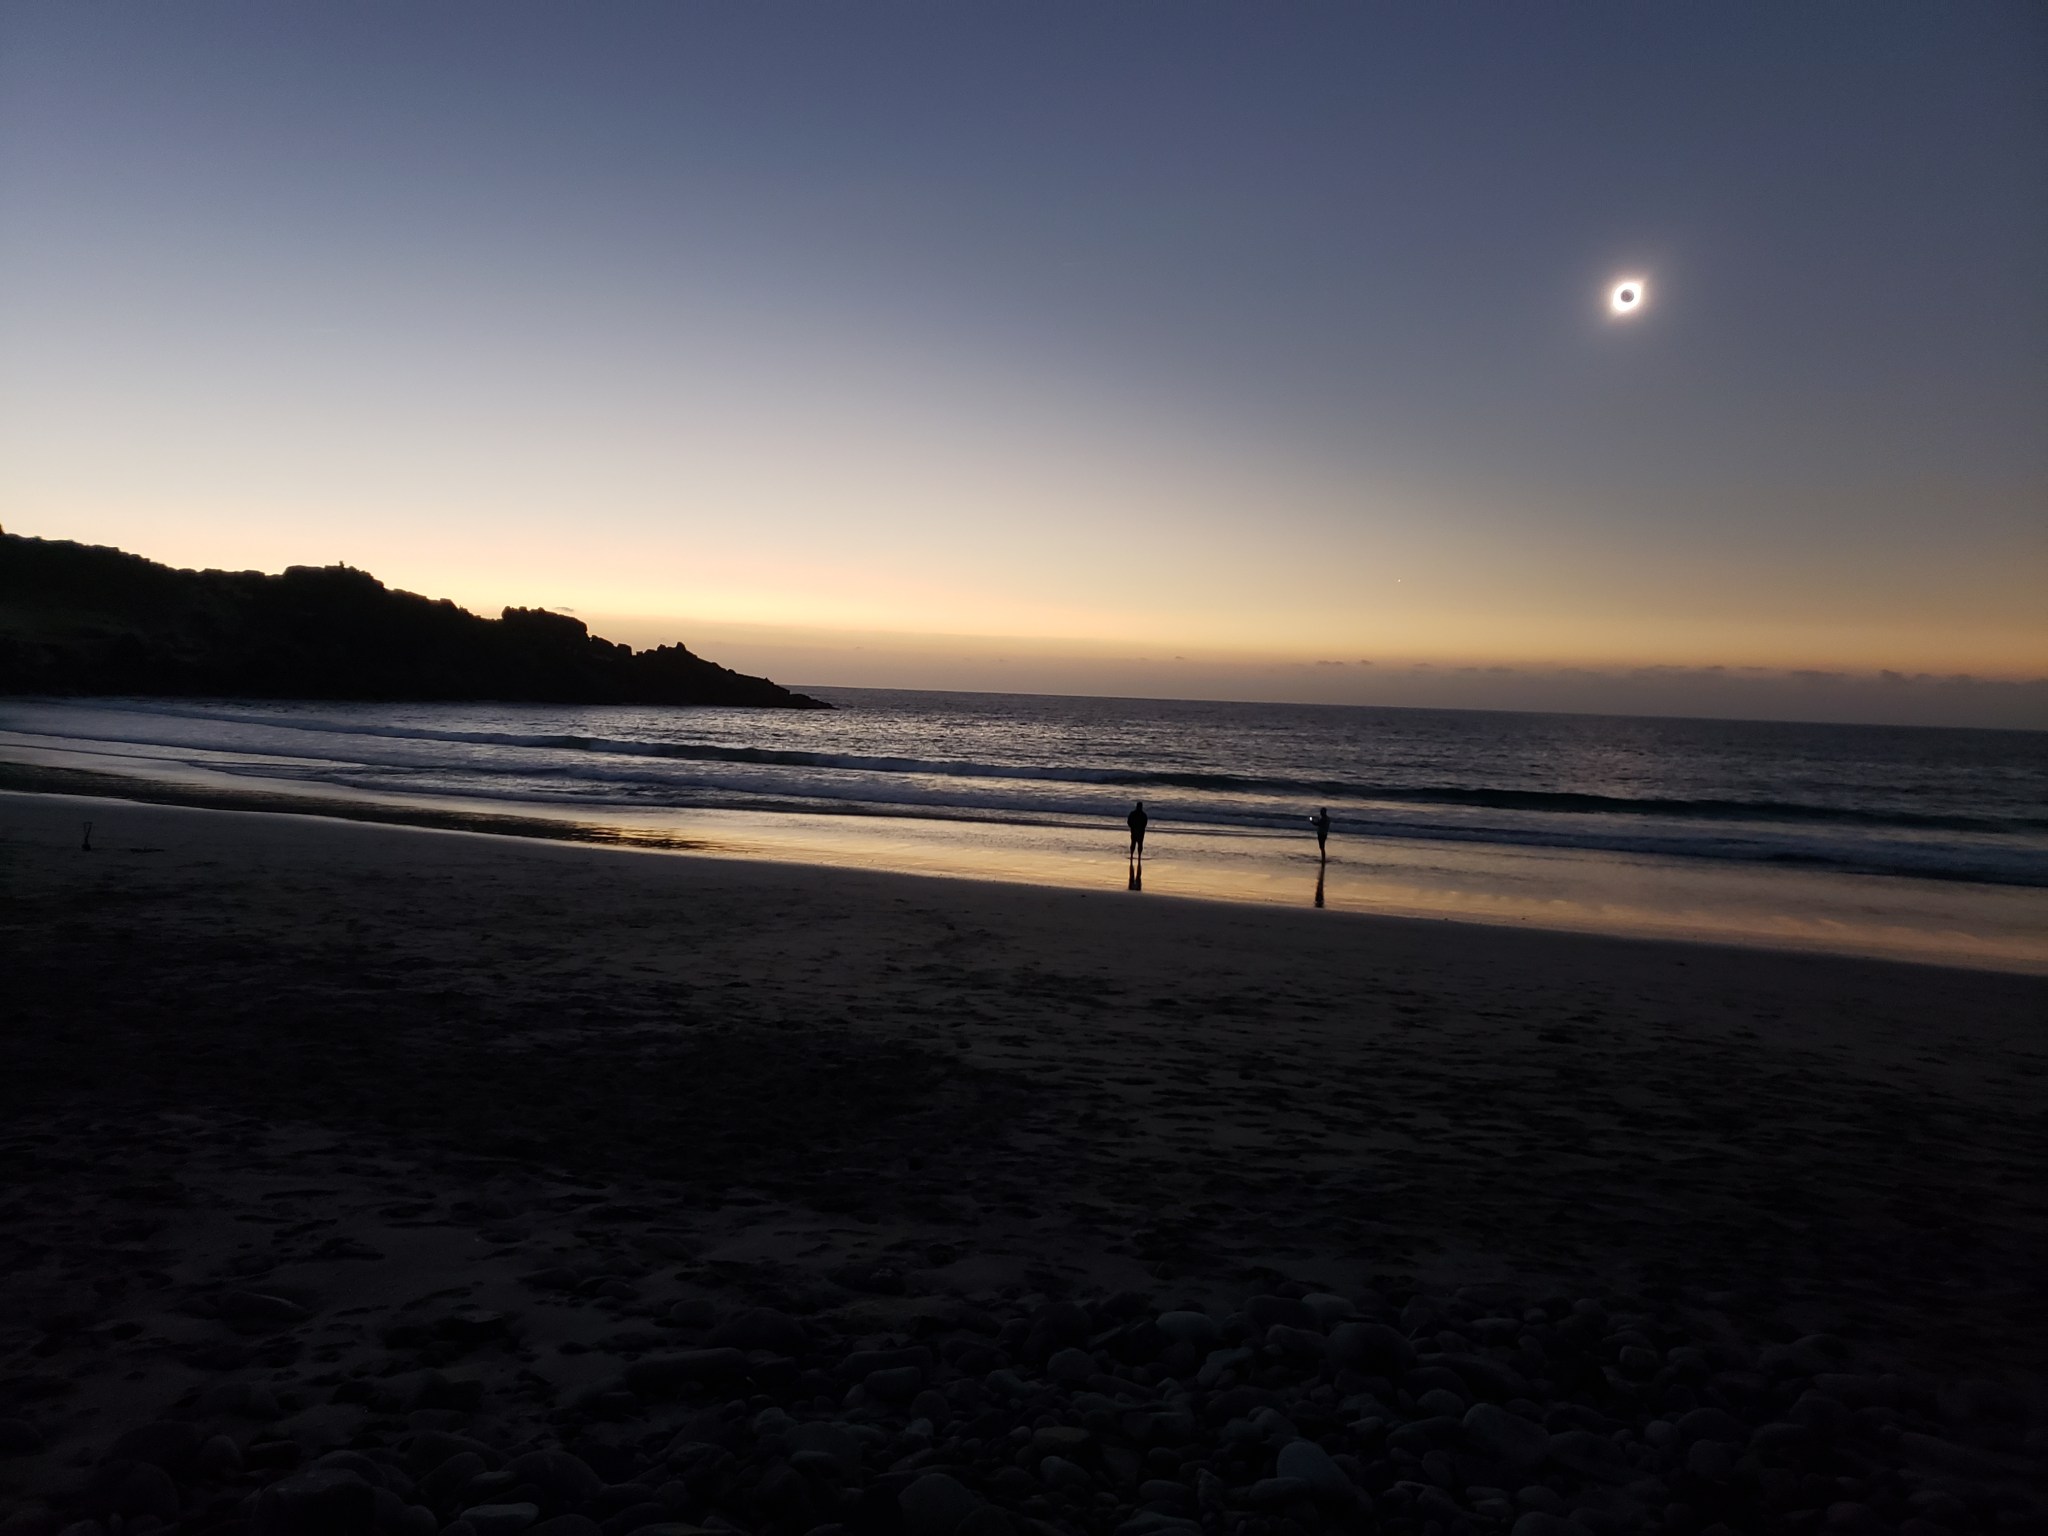 photo of an eclipse on a beach in Chile, there are two silhouettes of people on the beach